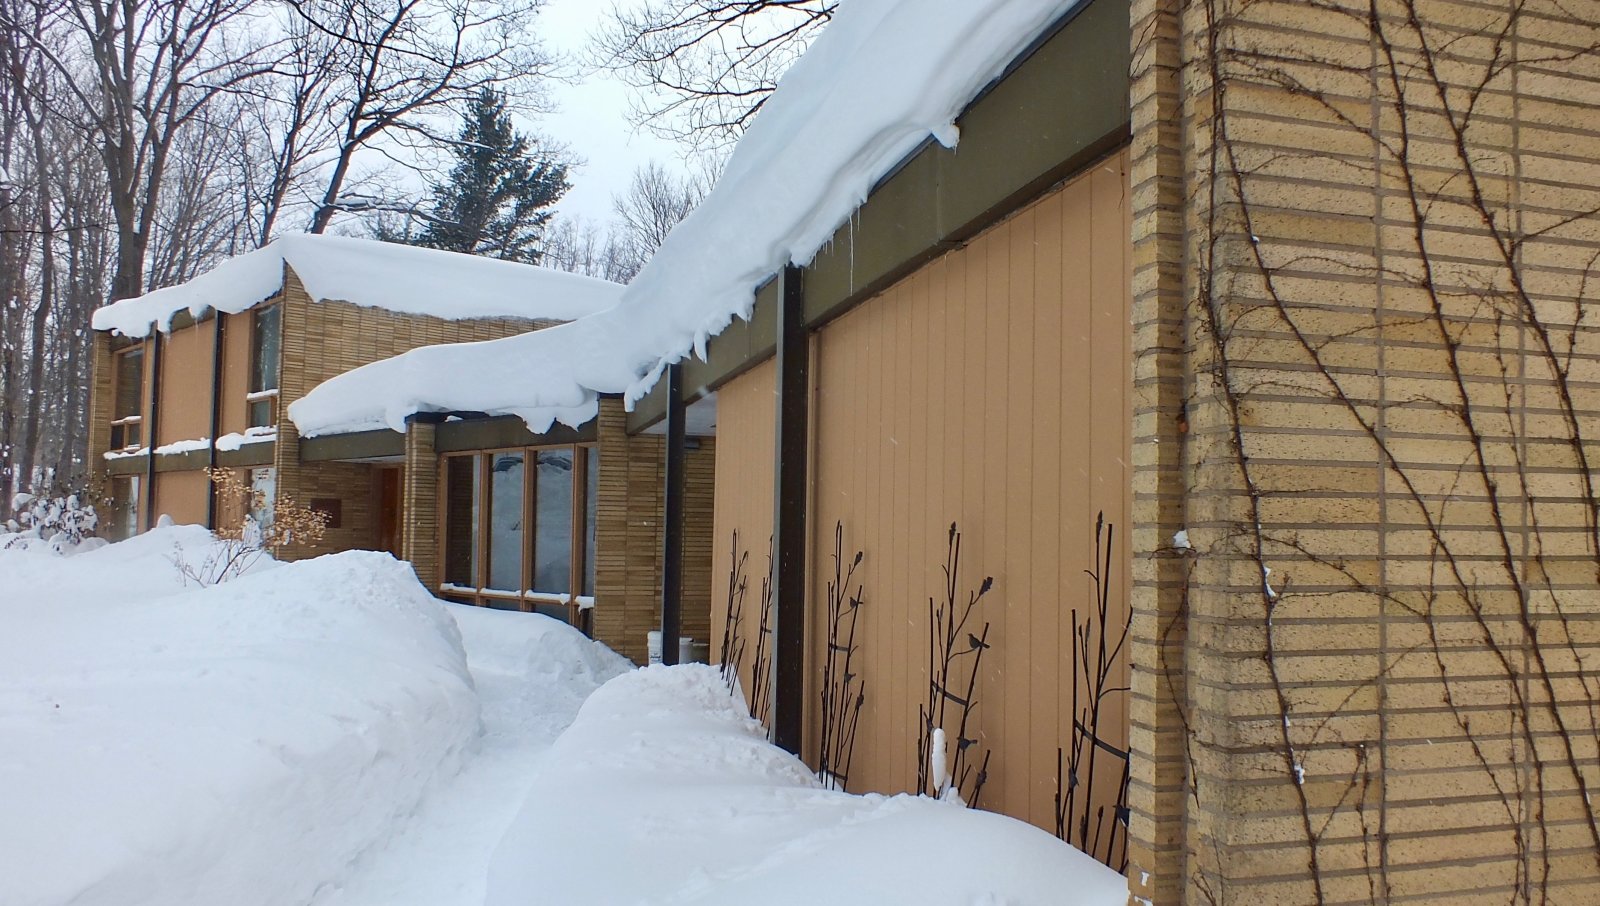 Michigan Tech's Sustainability Demonstration House opened its doors (and cleared the sidewalks) for visitors during Winter Carnival 2019.